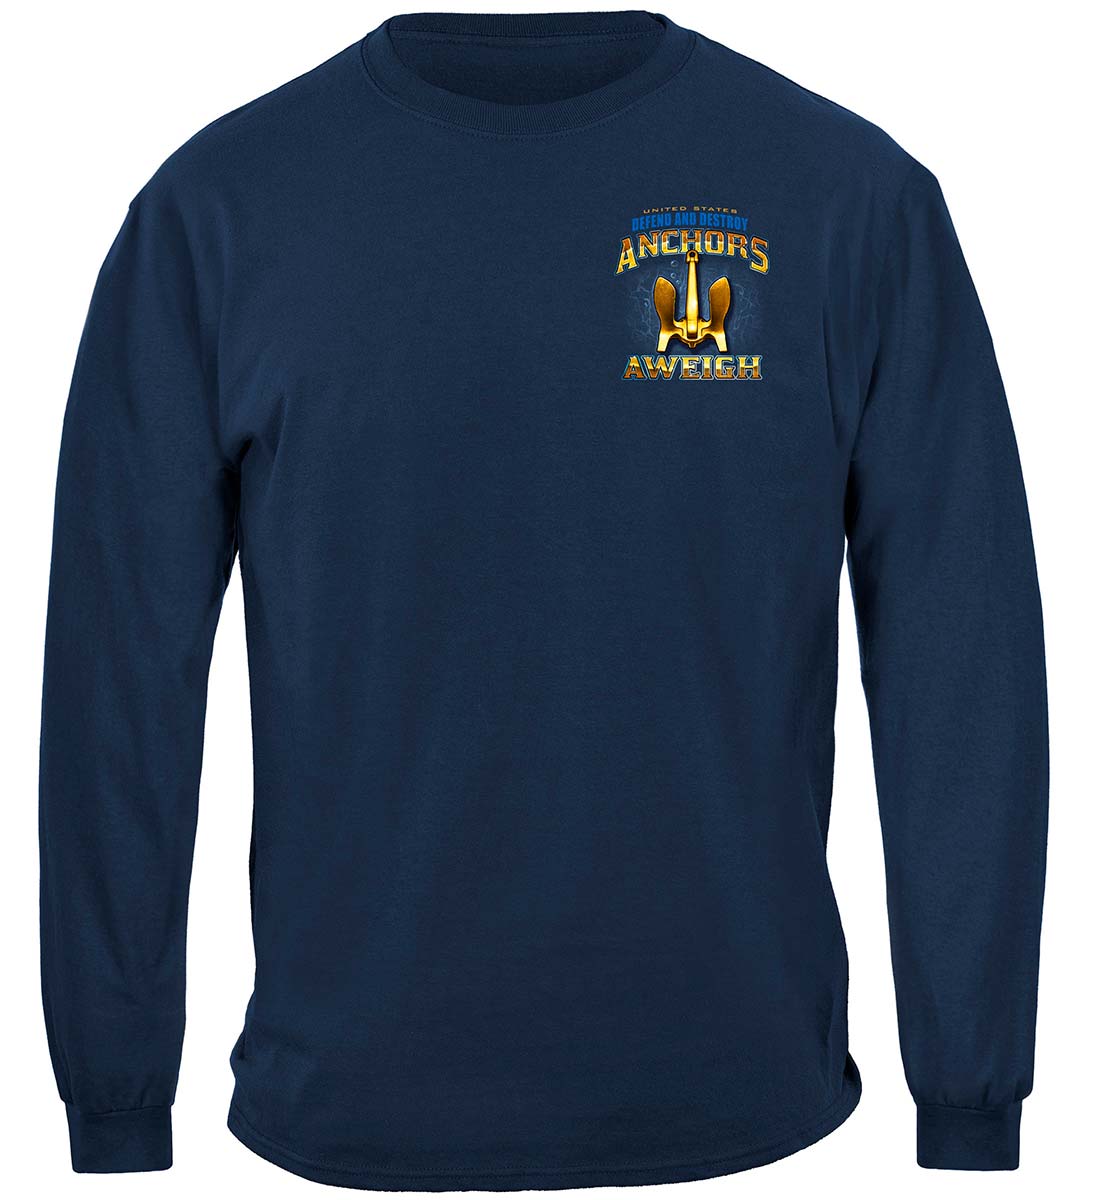 US NAVY Anchors Aweigh Defend And Destroy Premium Hooded Sweat Shirt